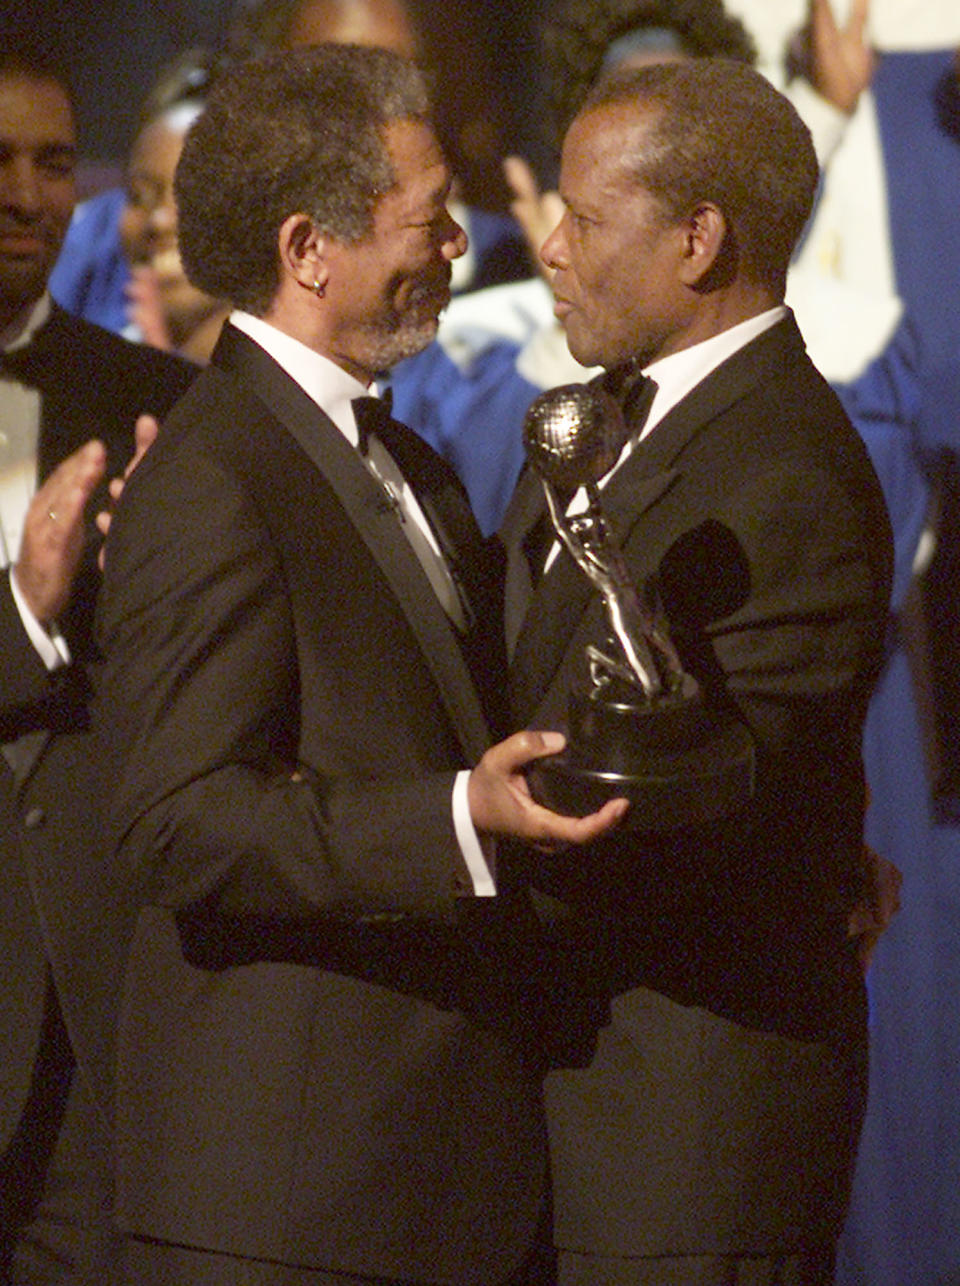 Morgan Freeman presented Sidney Poitier with the Hall of Fame at the 32nd NAACP Image Awards at the Universal Amphitheatre in Los Angeles on March 3, 2001. - Credit: Kevin Winter/Getty Images